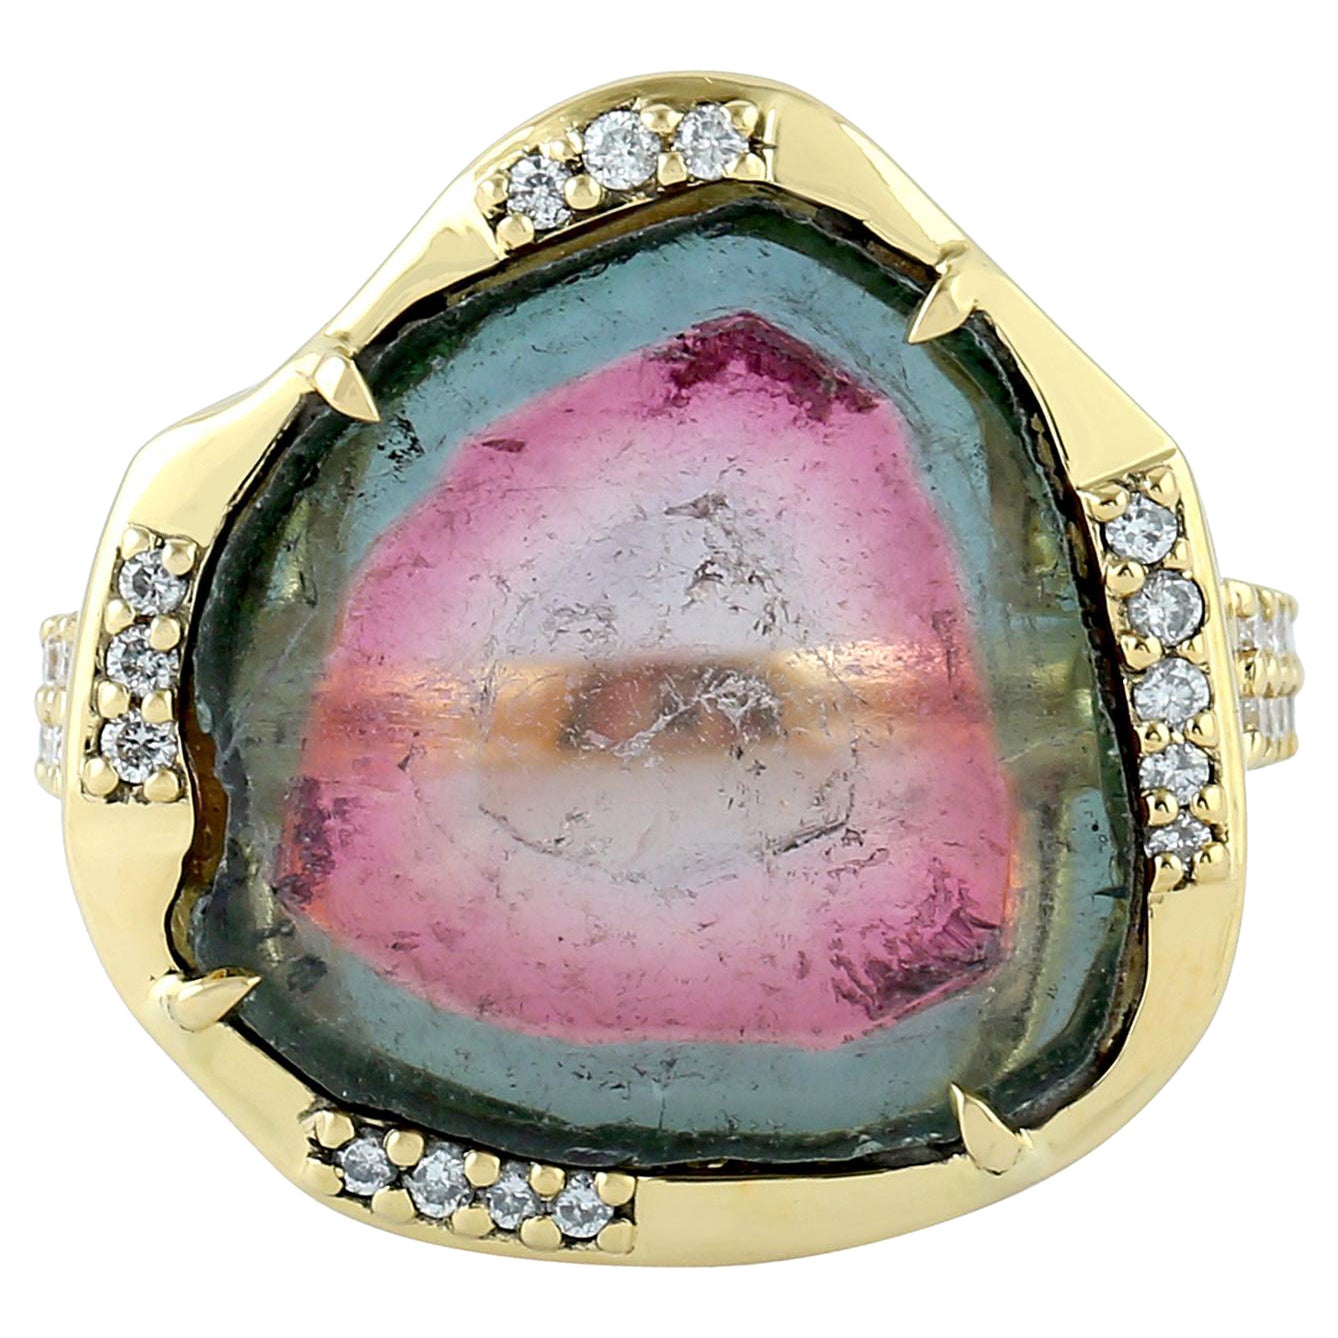 Sliced Watermelon Tourmaline Ring with Pave Diamonds Made in 18k Yellow Gold